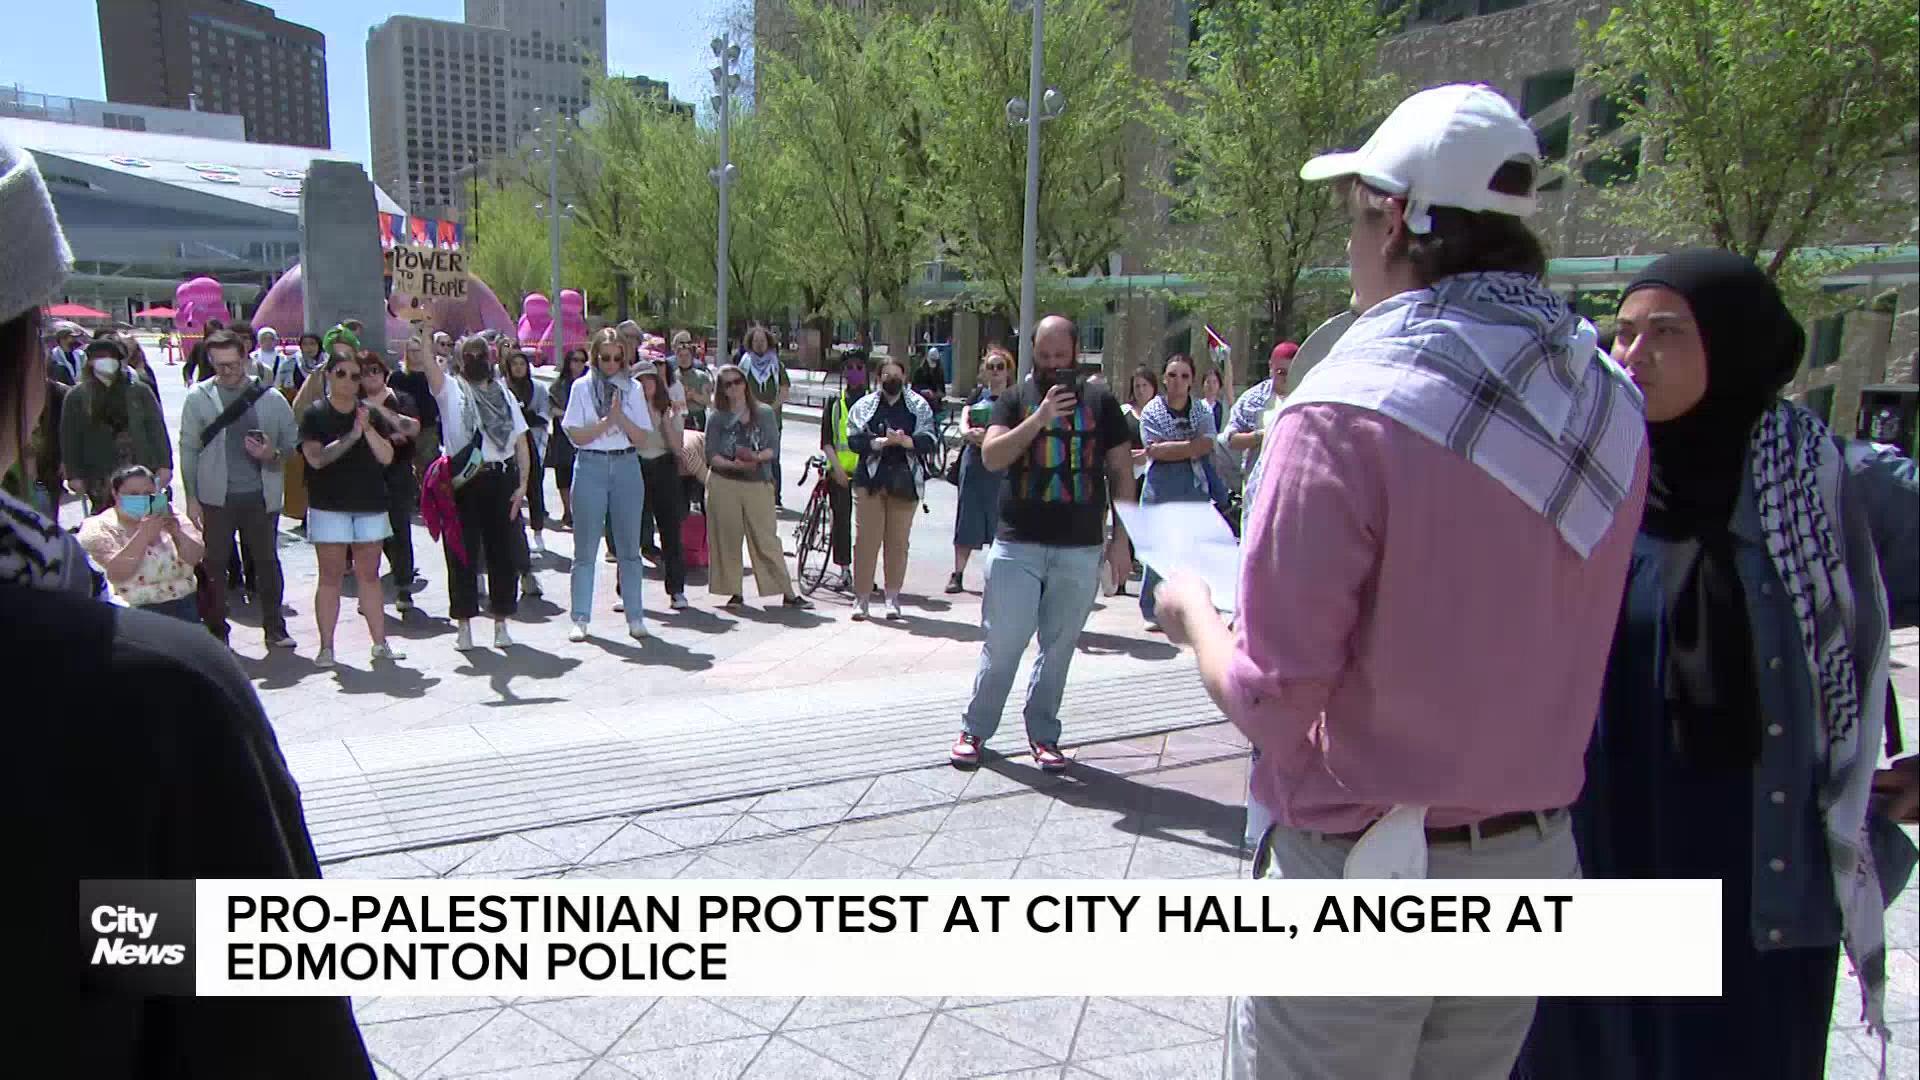 Pro-Palestinian protest against Edmonton police at City Hall